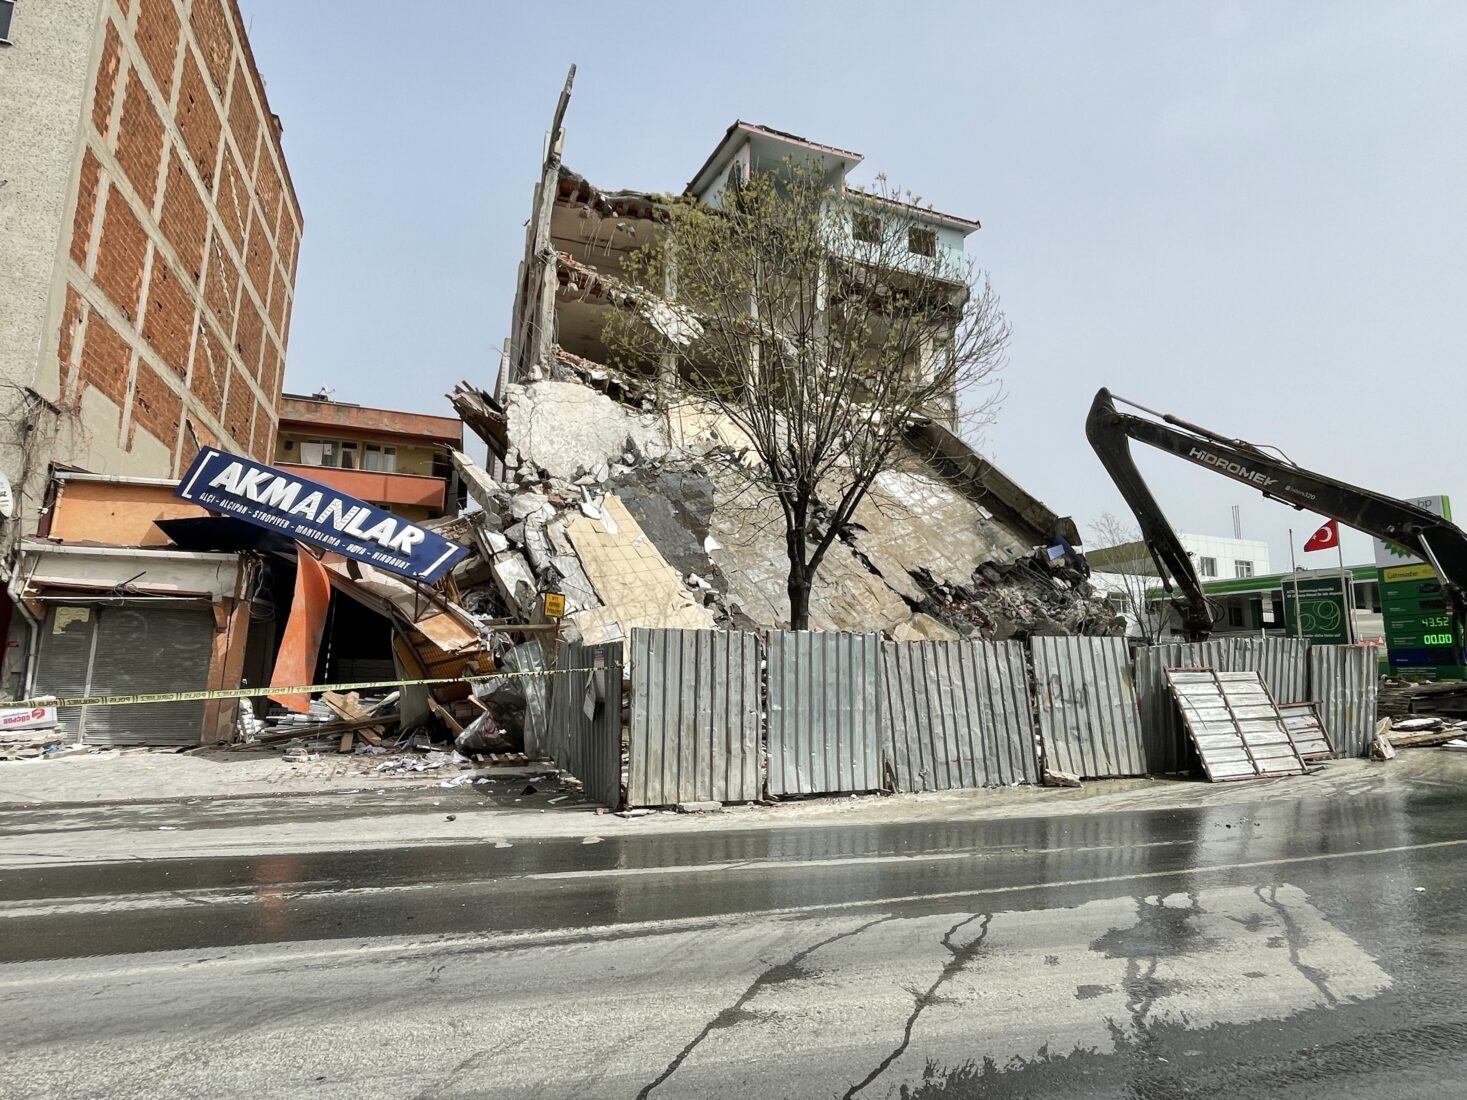 Building collapse crisis in Istanbul sparks earthquake concerns